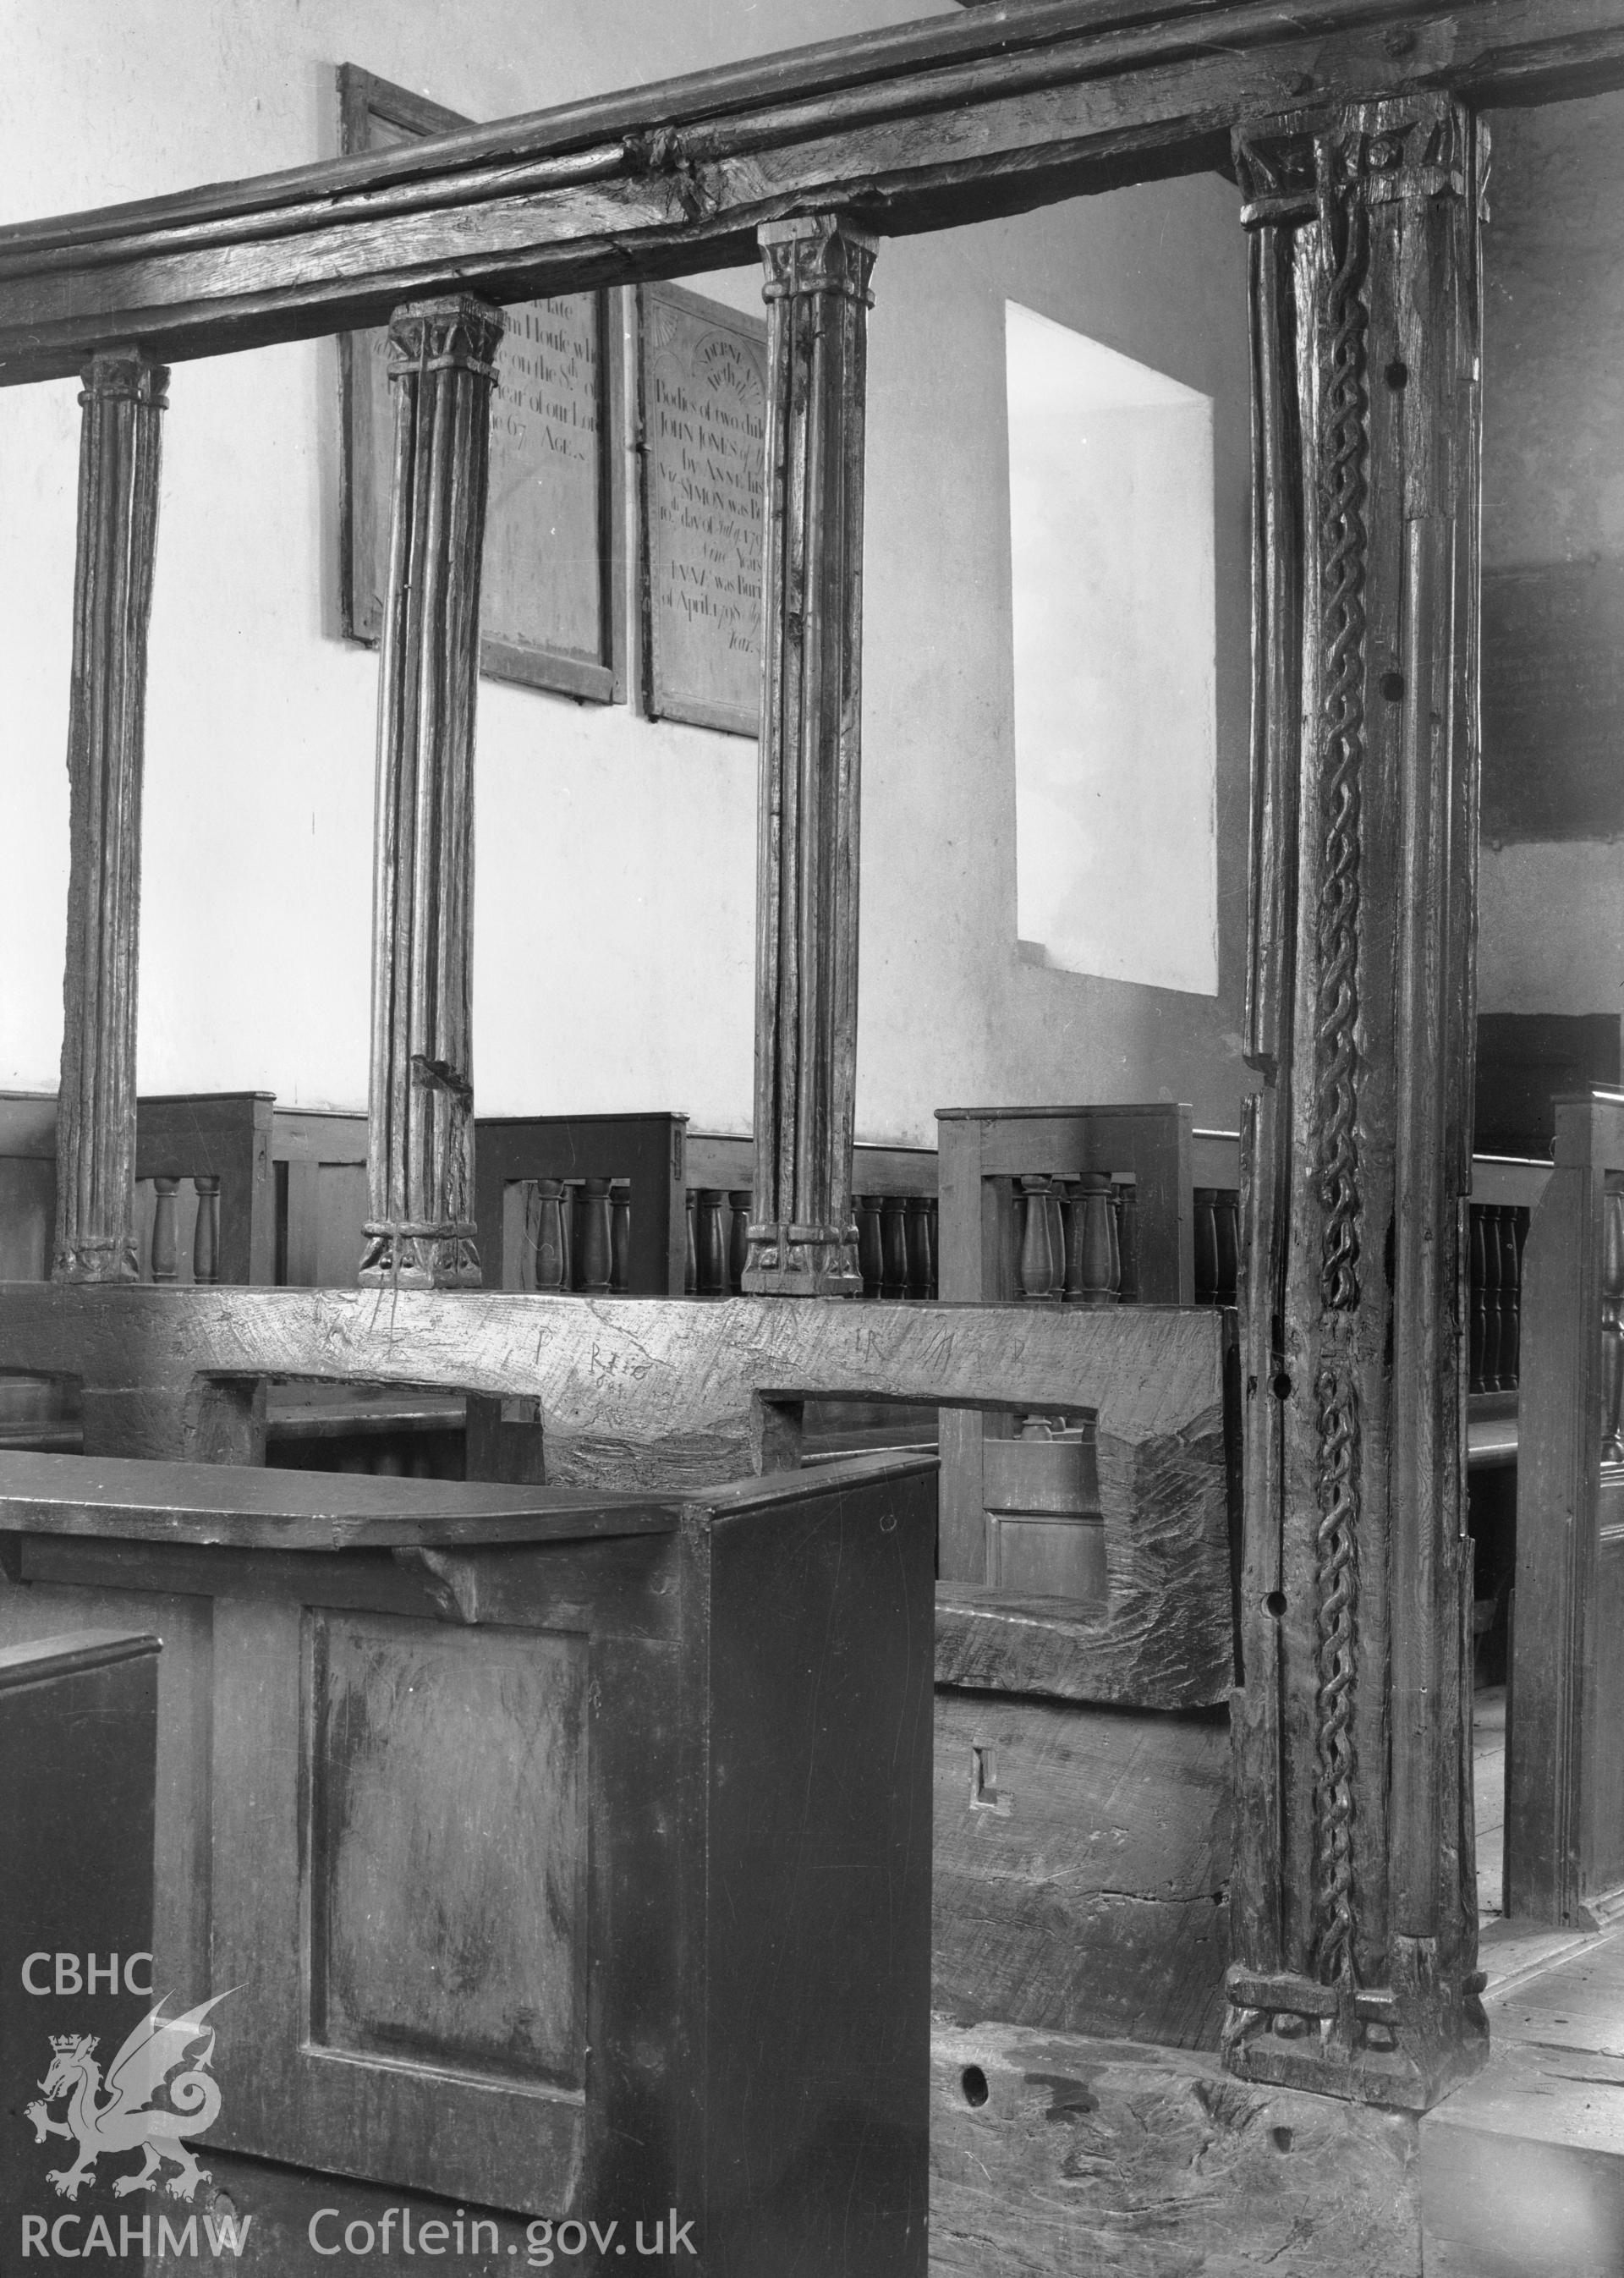 Interior view showing the screen at St Brothen's Church, Llanfrothen taken 07.06.1941.